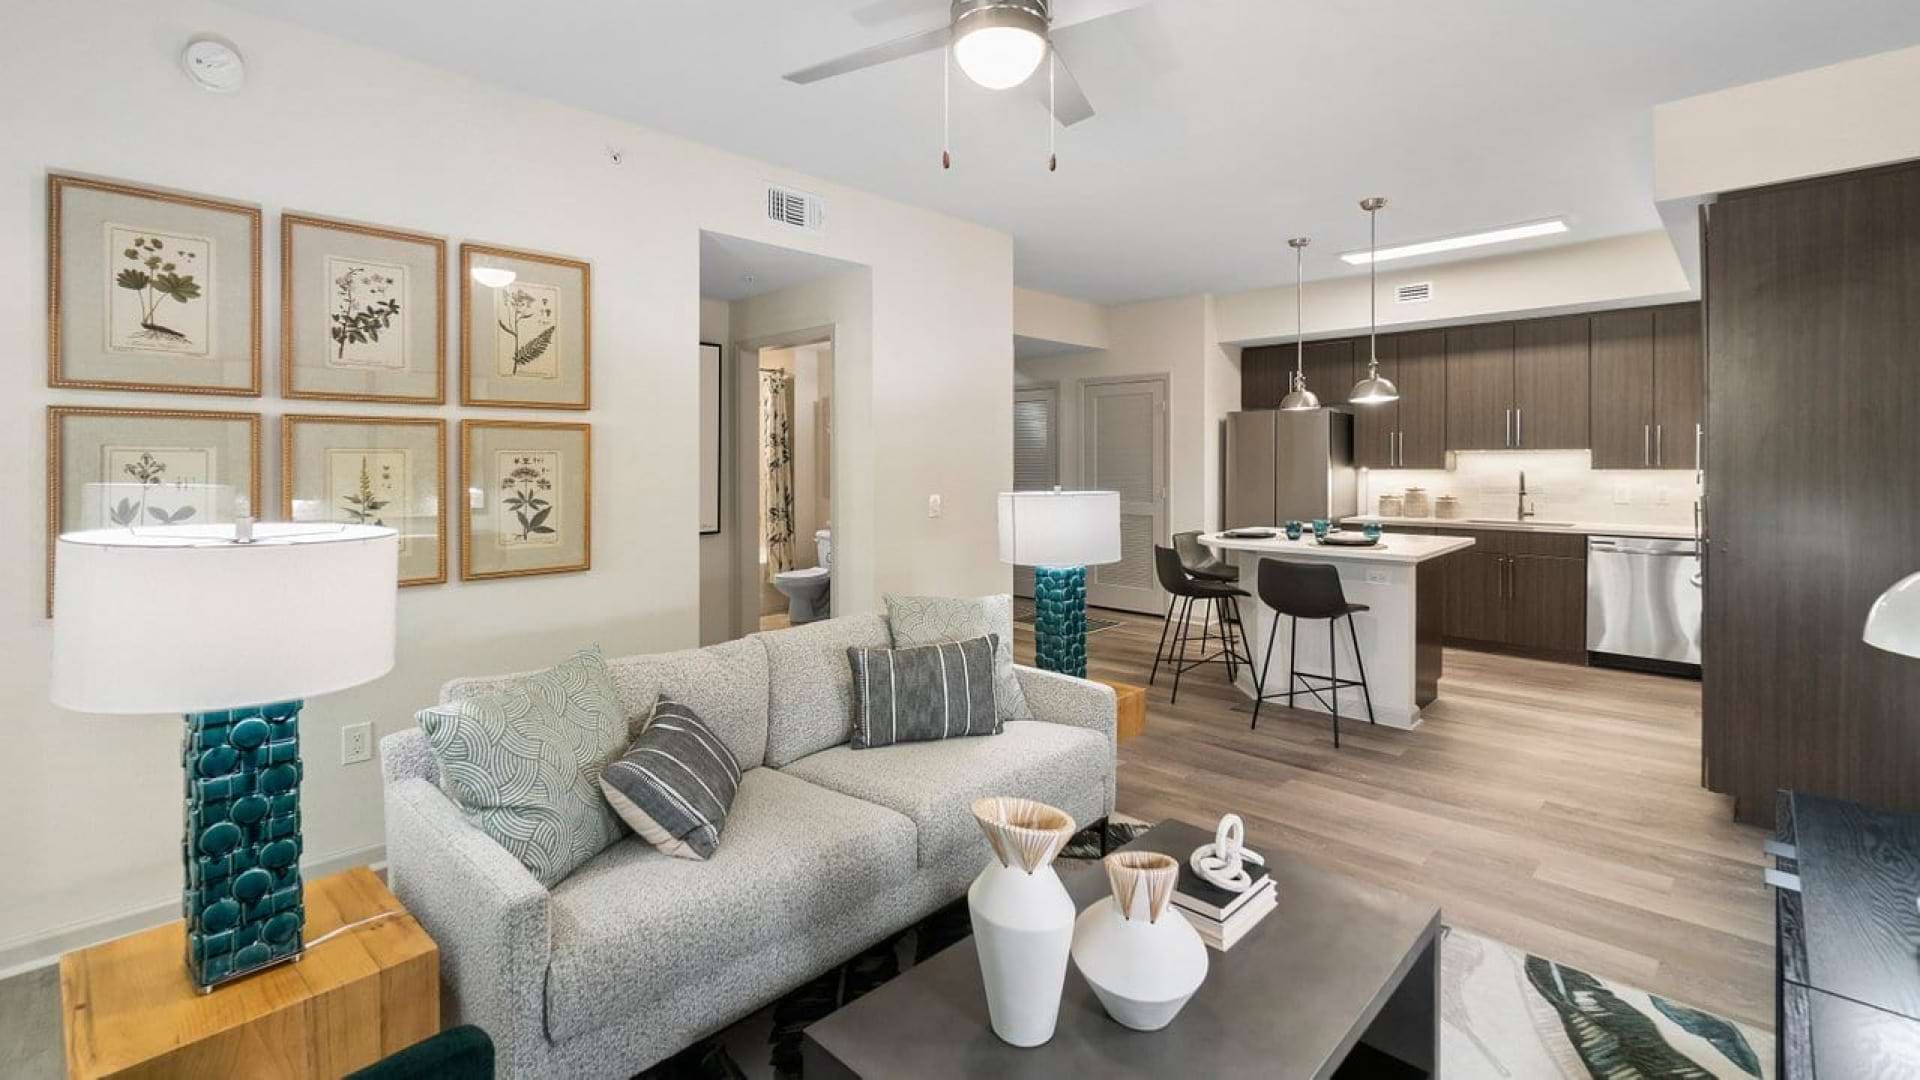 Luxury Kitchen and Living Area at Our Apartments for Rent in West Palm Beach